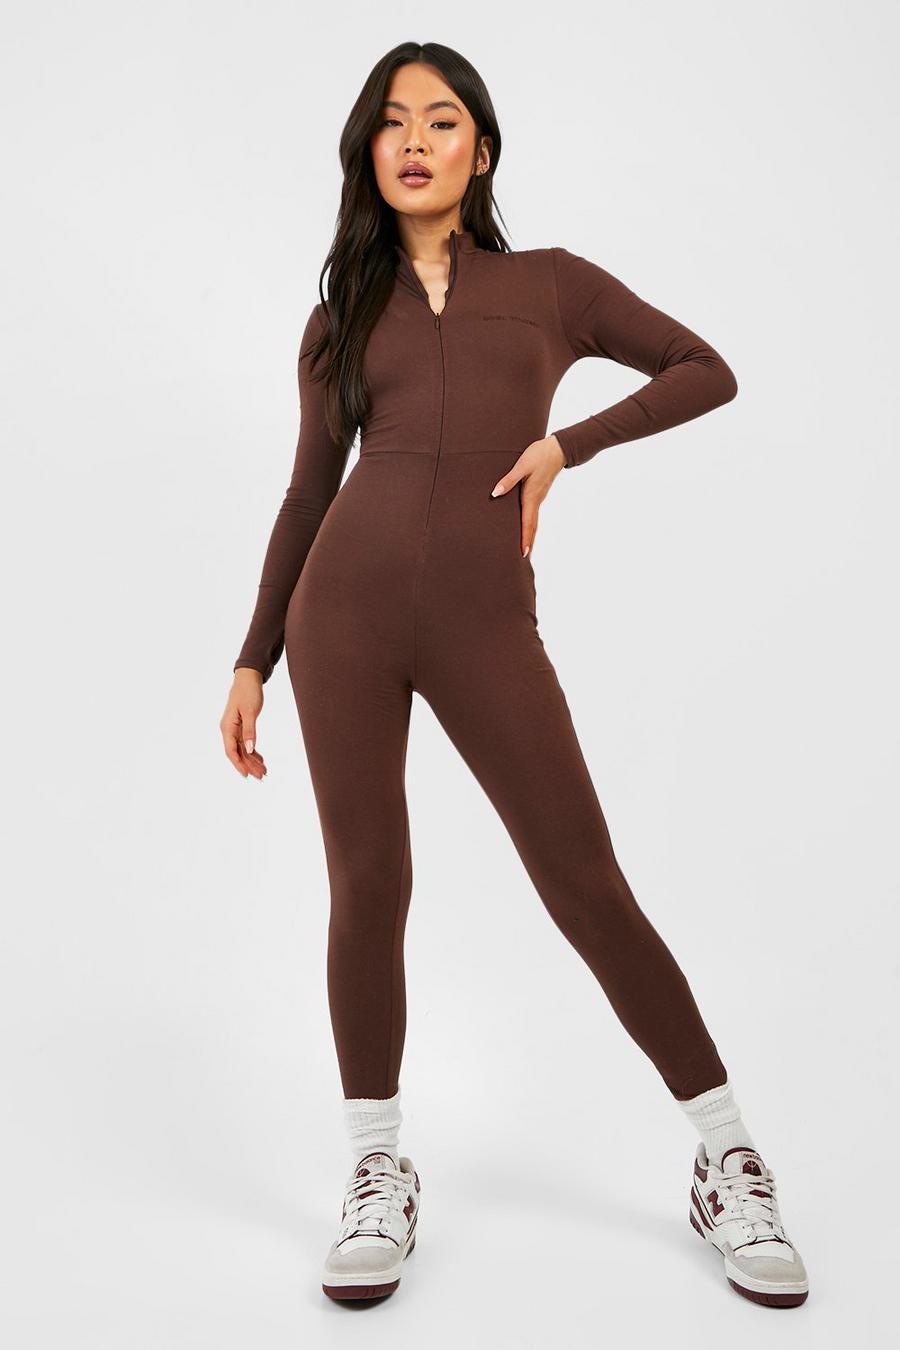 Chocolate brun Embroidered Zip Front Fitted Sculpt Jumpsuit